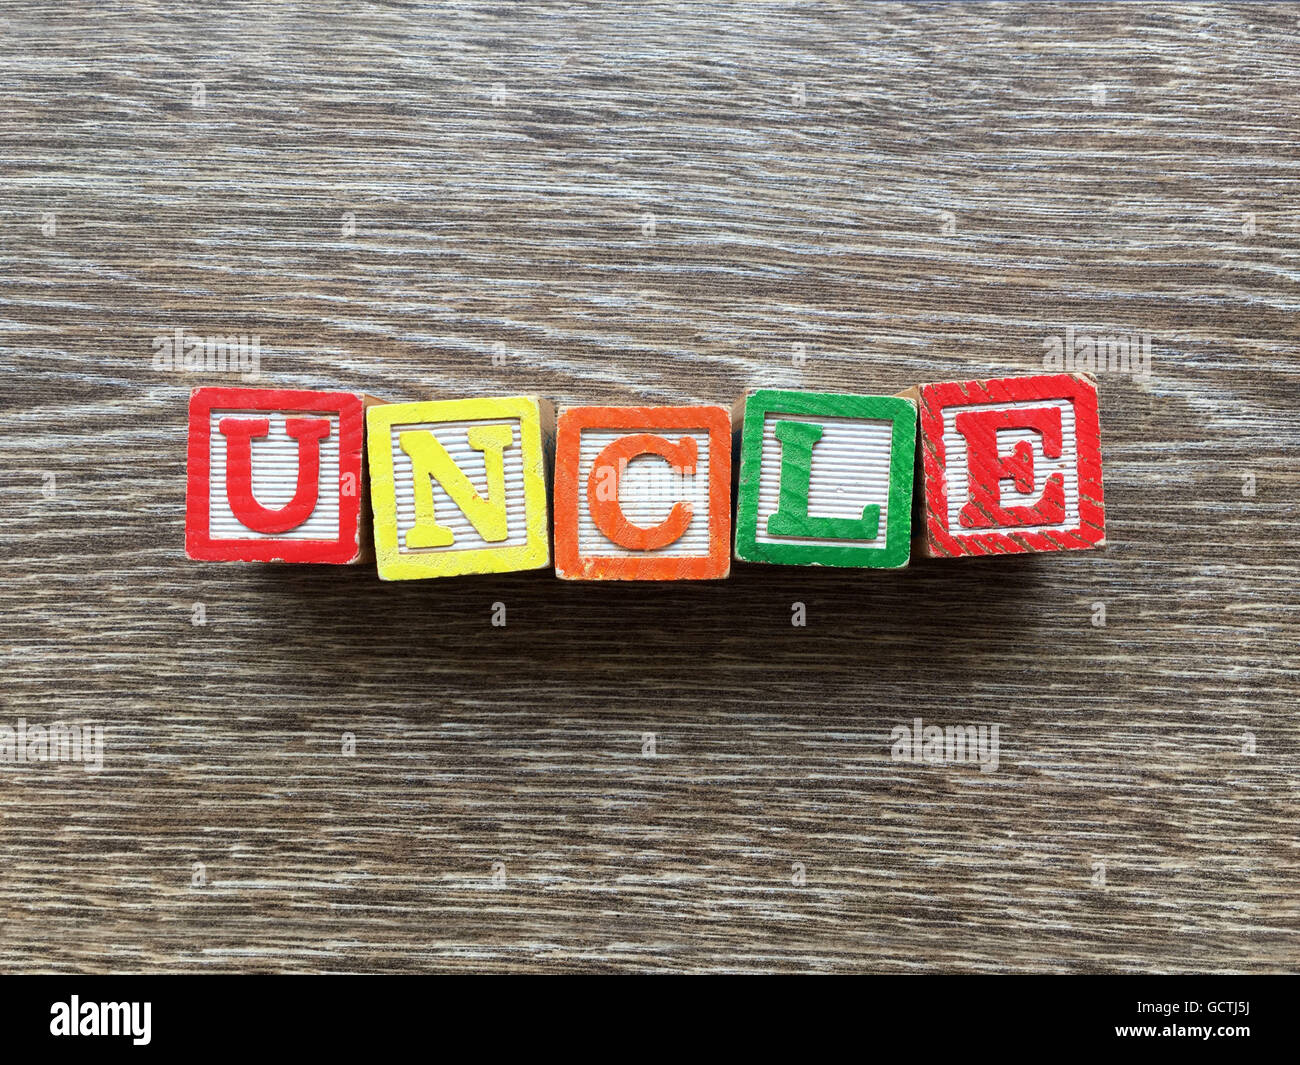 UNCLE word done with wood block letter toys Stock Photo